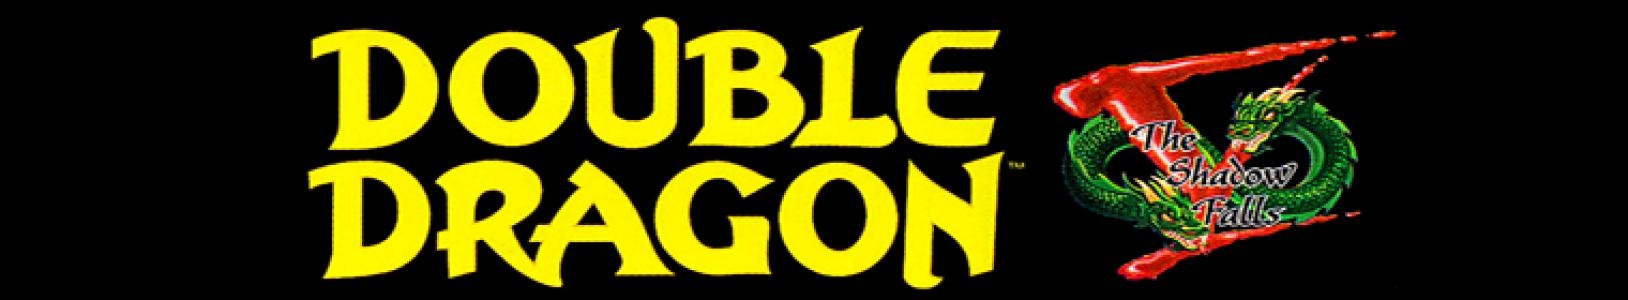 Double Dragon V: The Shadow Falls banner